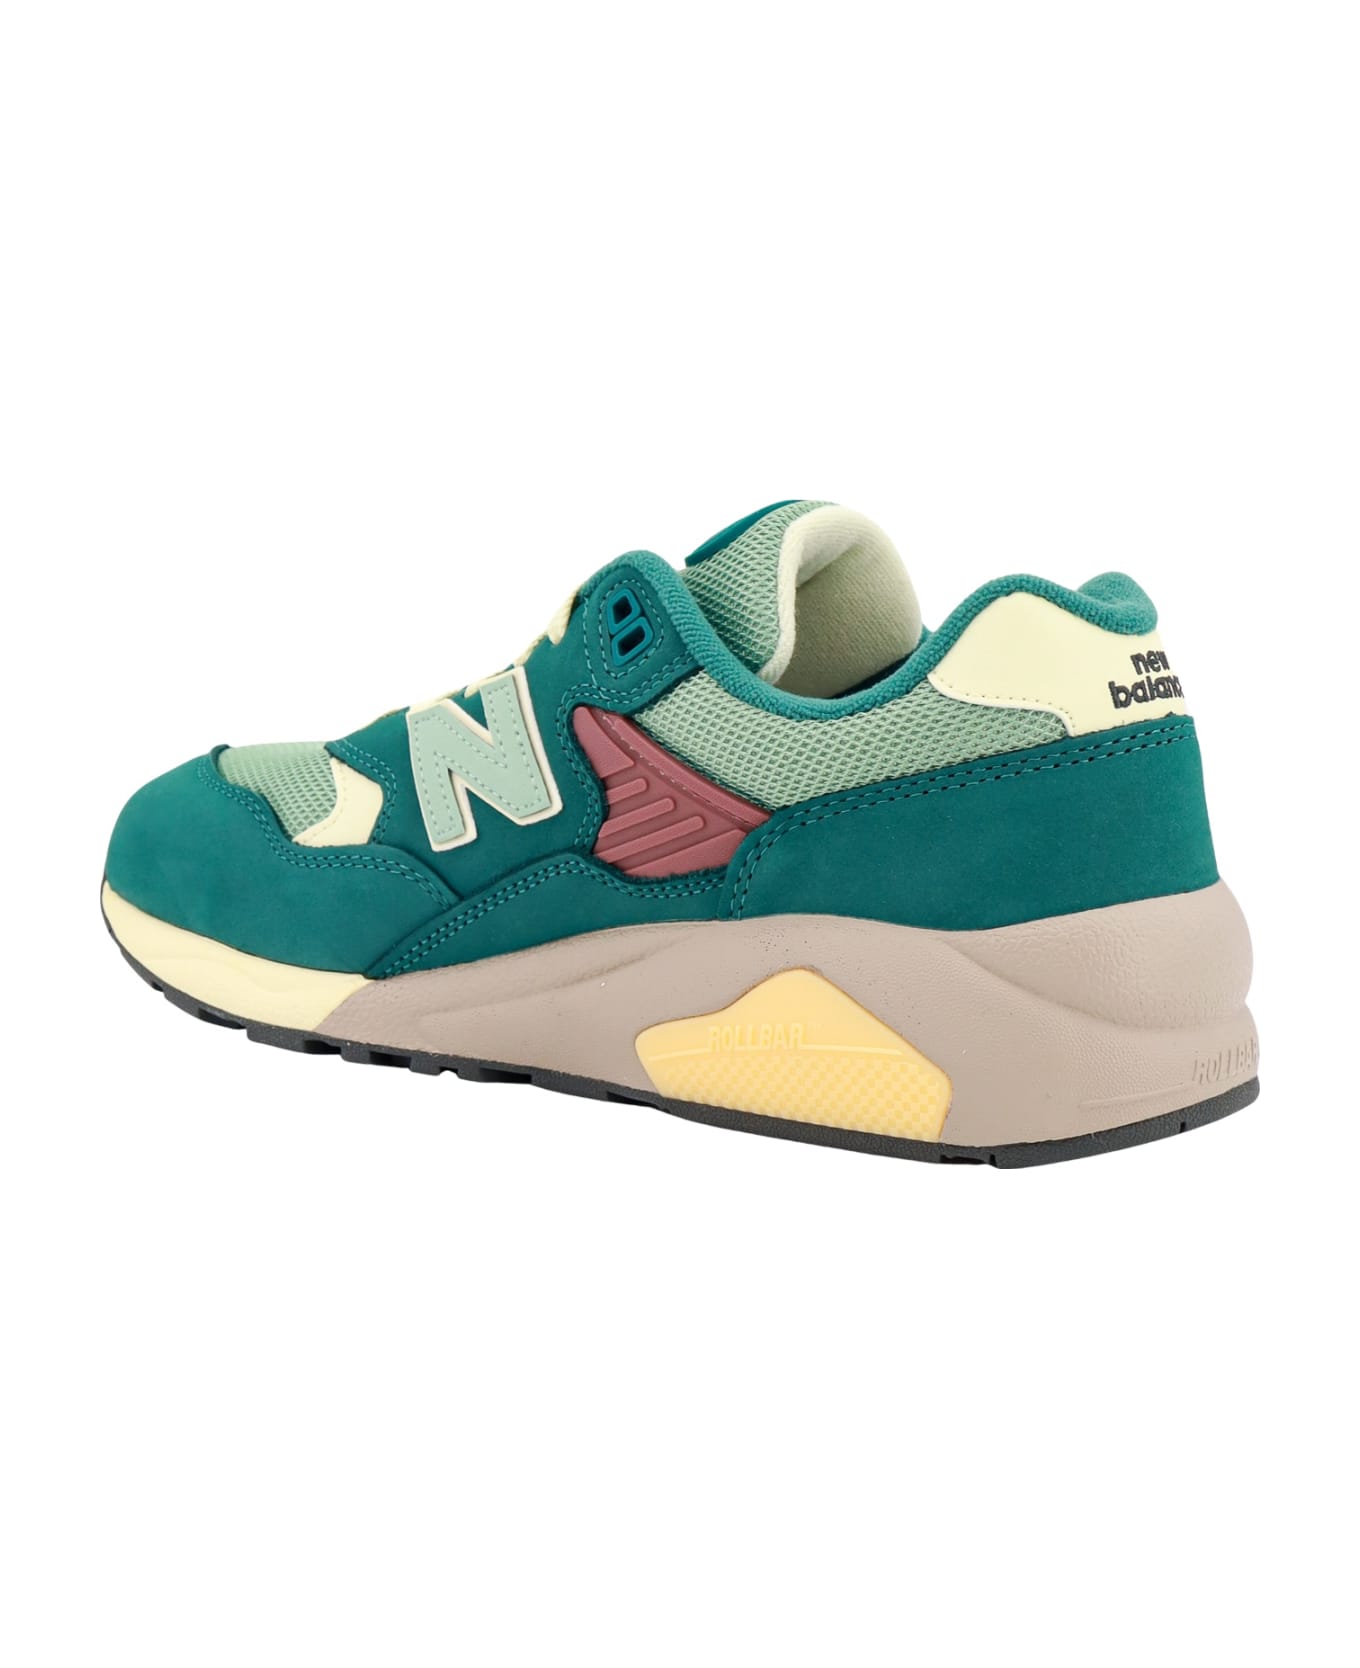 New Balance 580 Sneakers - Green